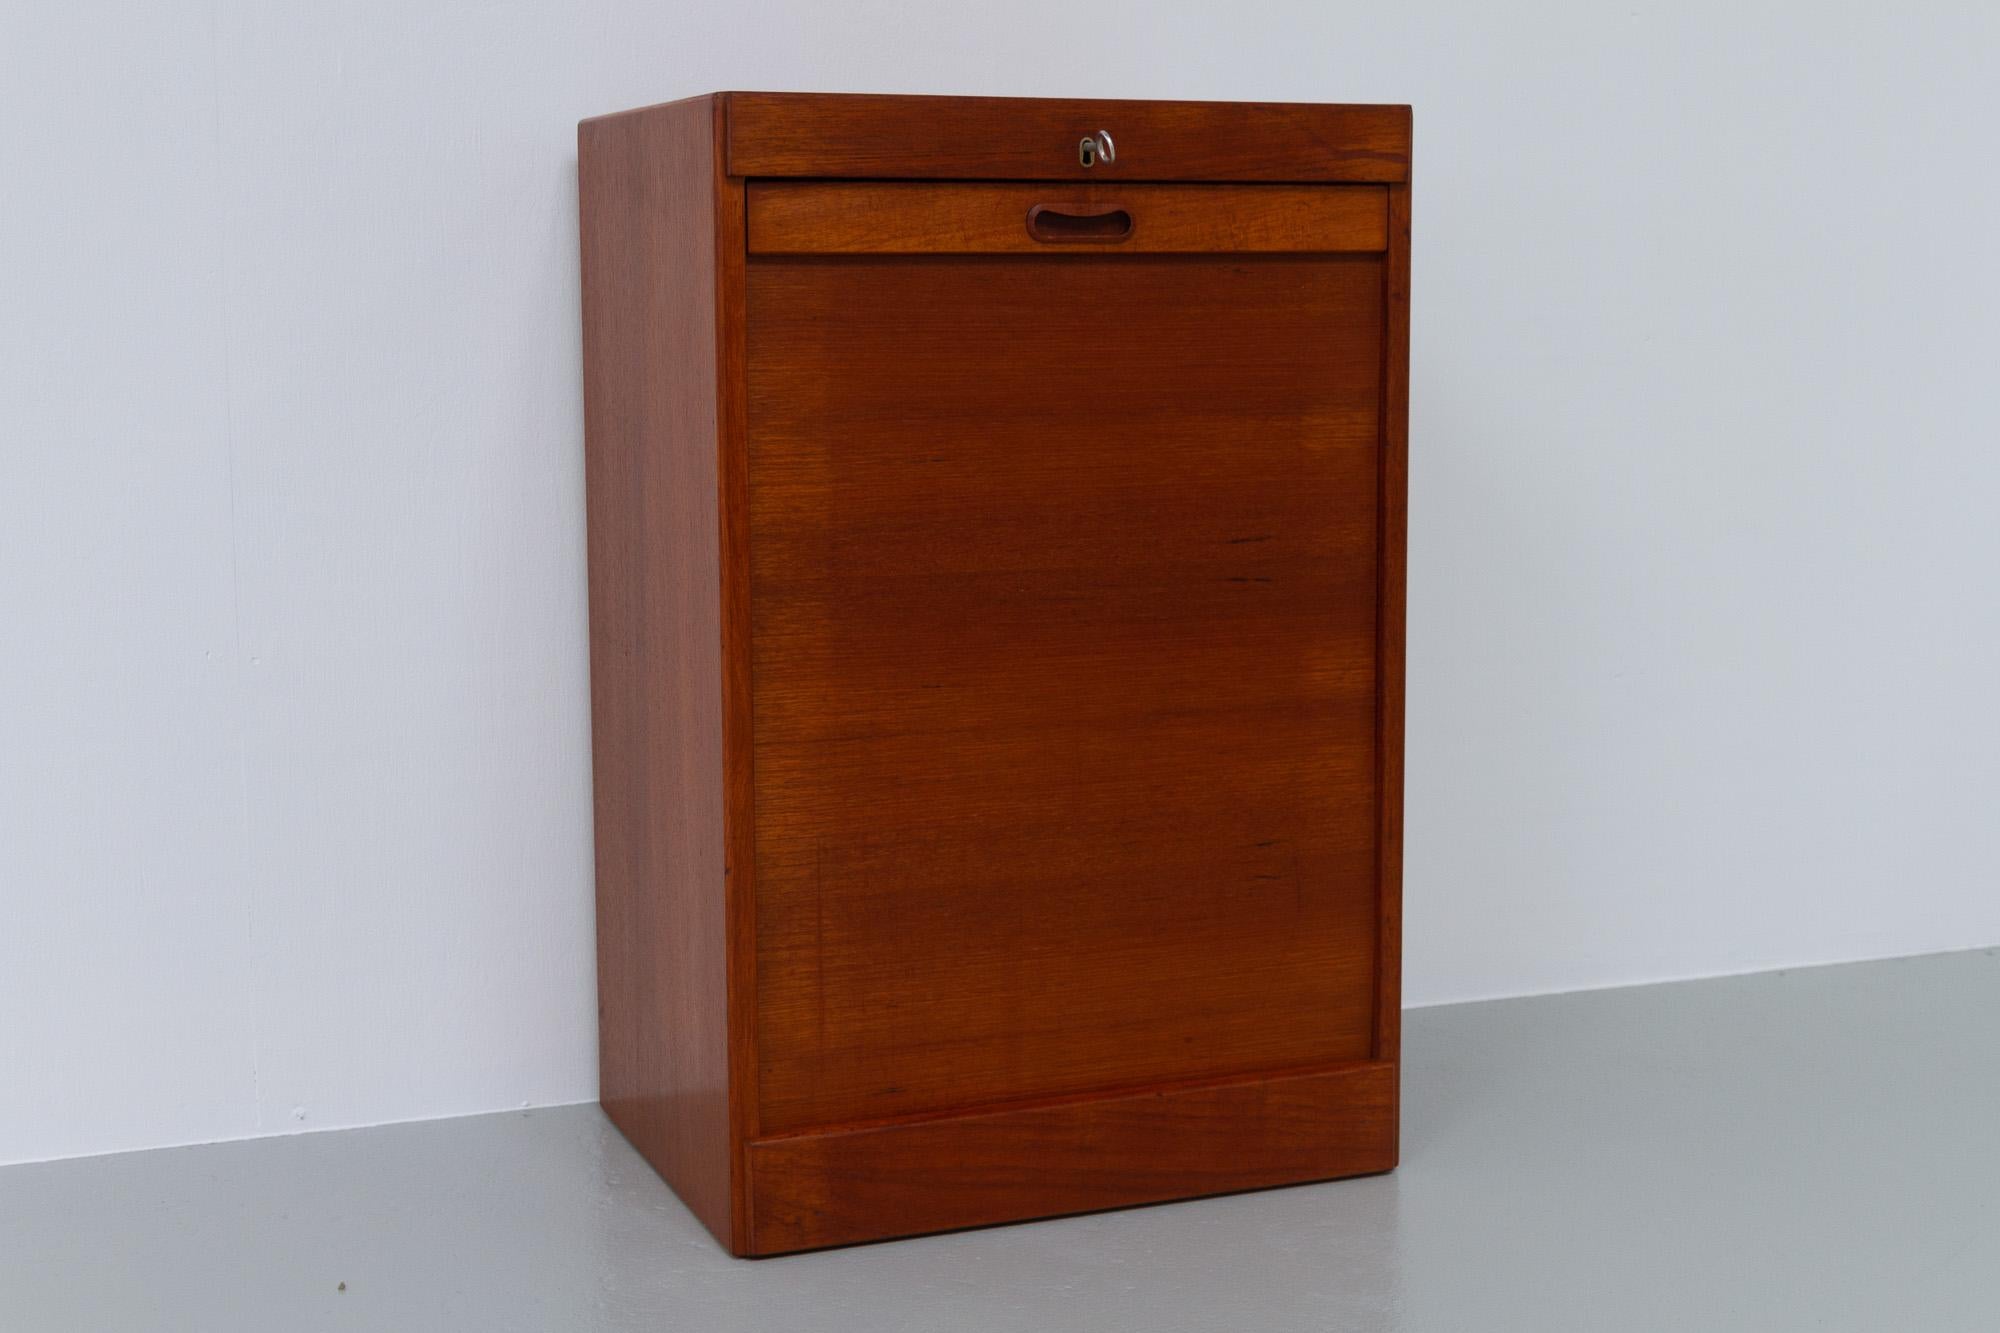 Vintage Danish teak cabinet with tambour door, 1960s.
Small Danish Mid-Century Modern filing cabinet in teak with vertical rolling tambour door. Three drawers in solid beech. Door is lockable, key is included. Sturdy construction.
Even though it